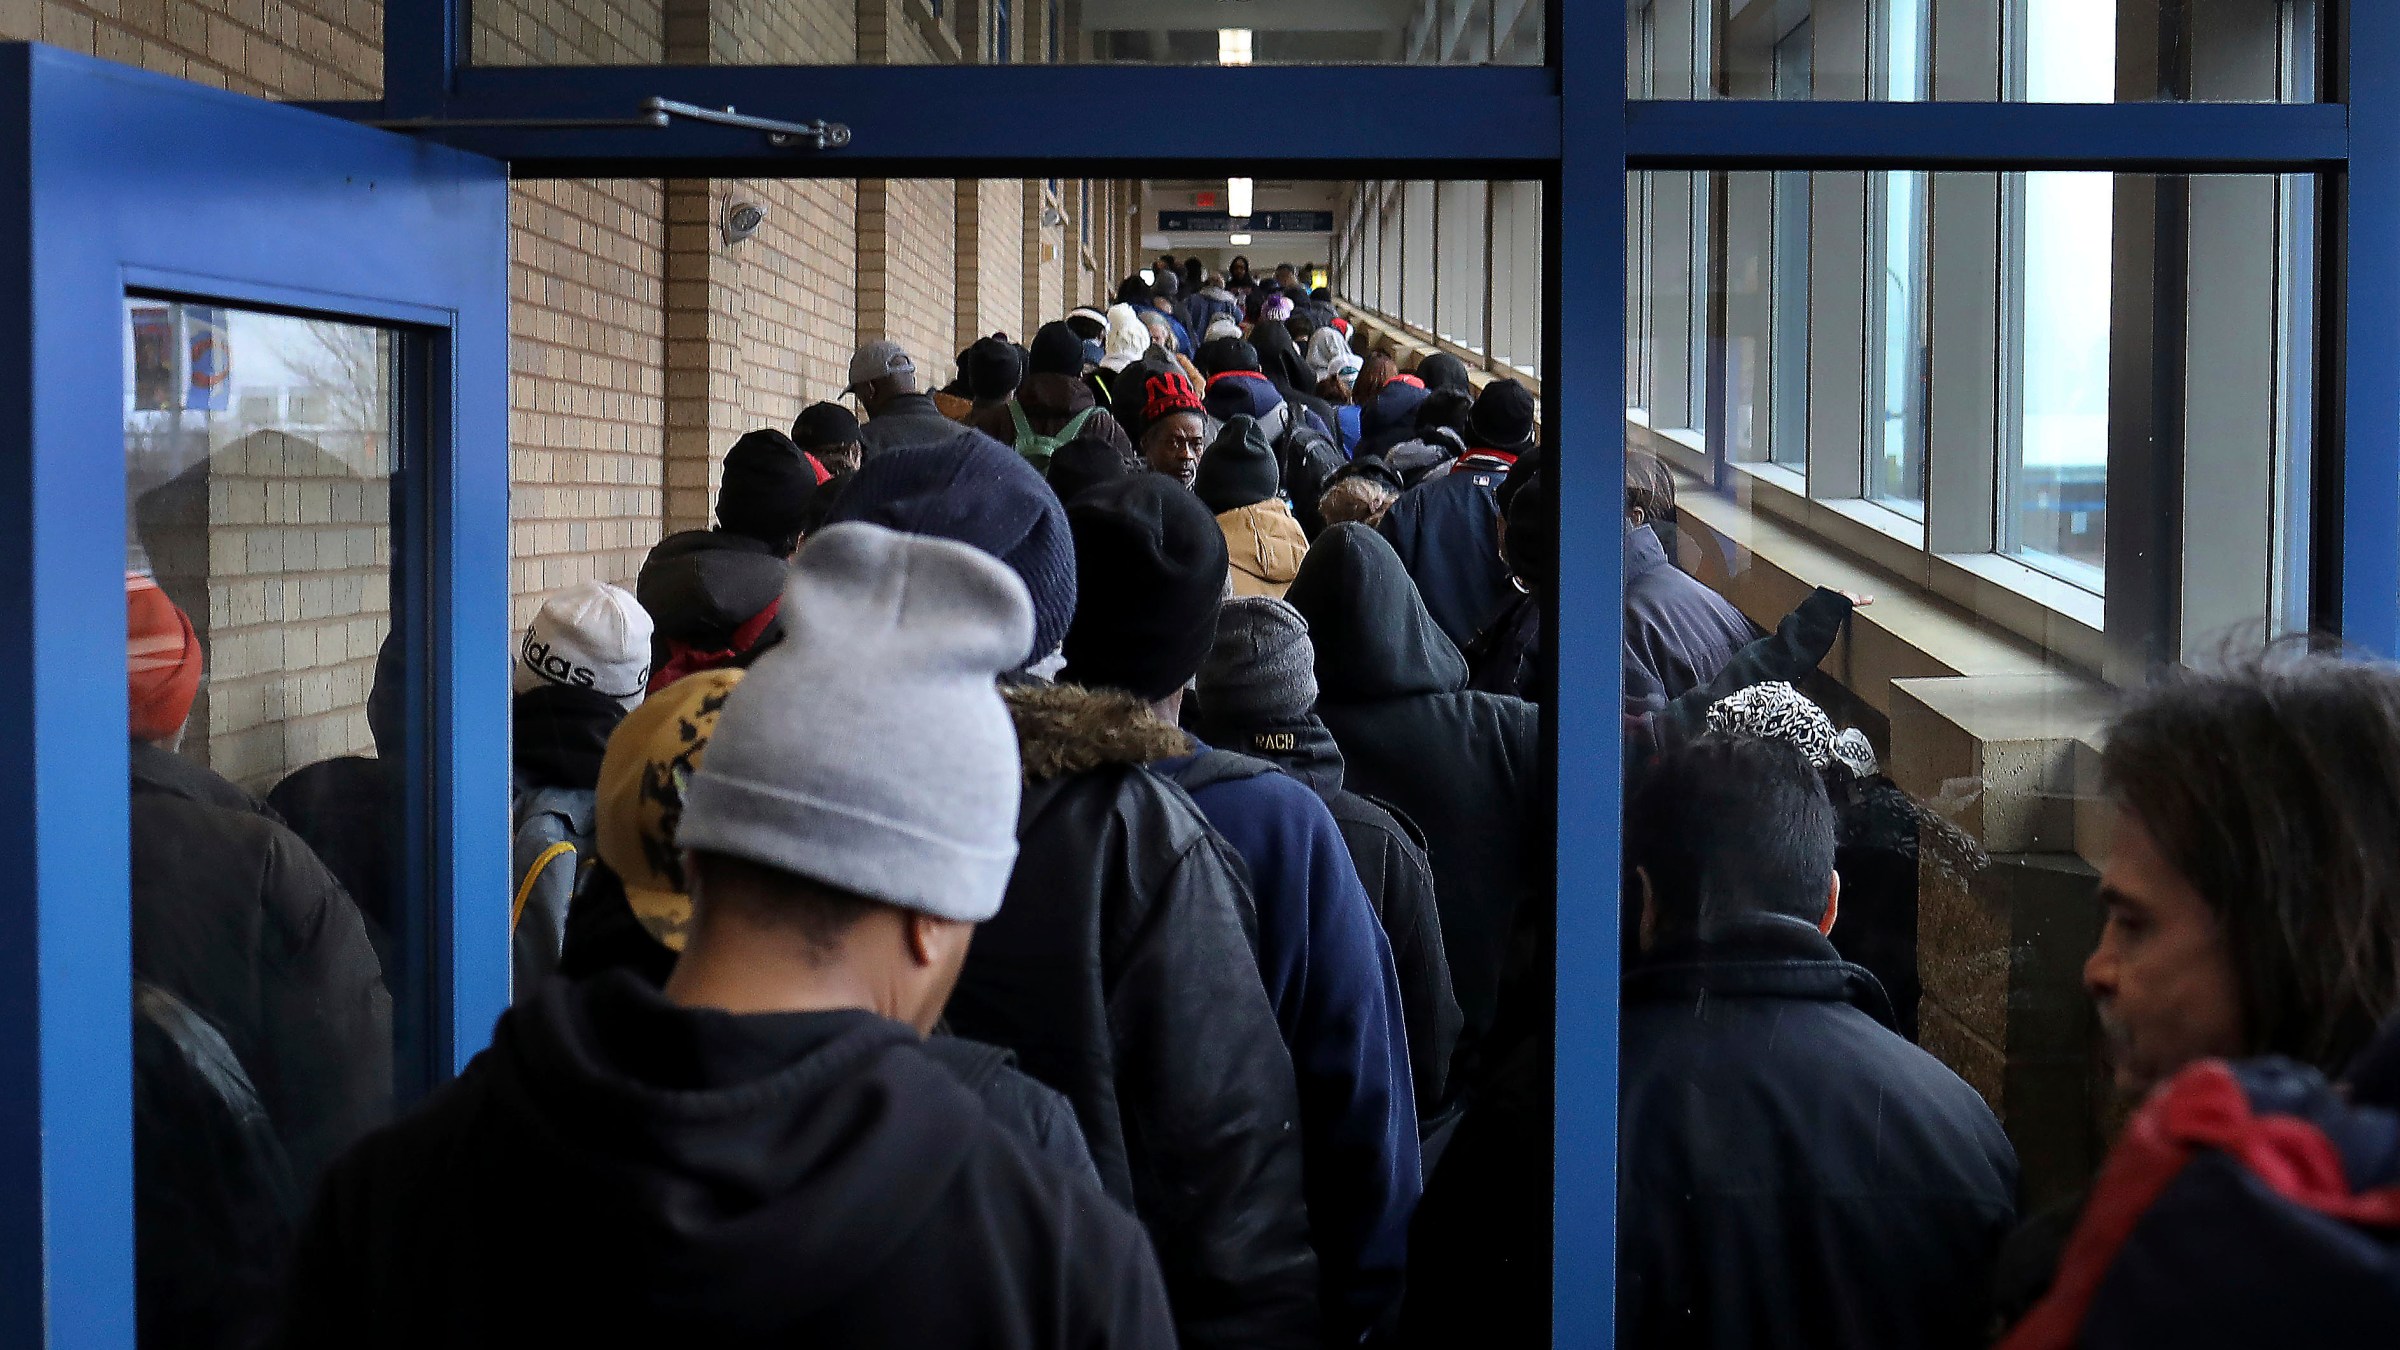 These Photos Show the Staggering Food Bank Lines Across America